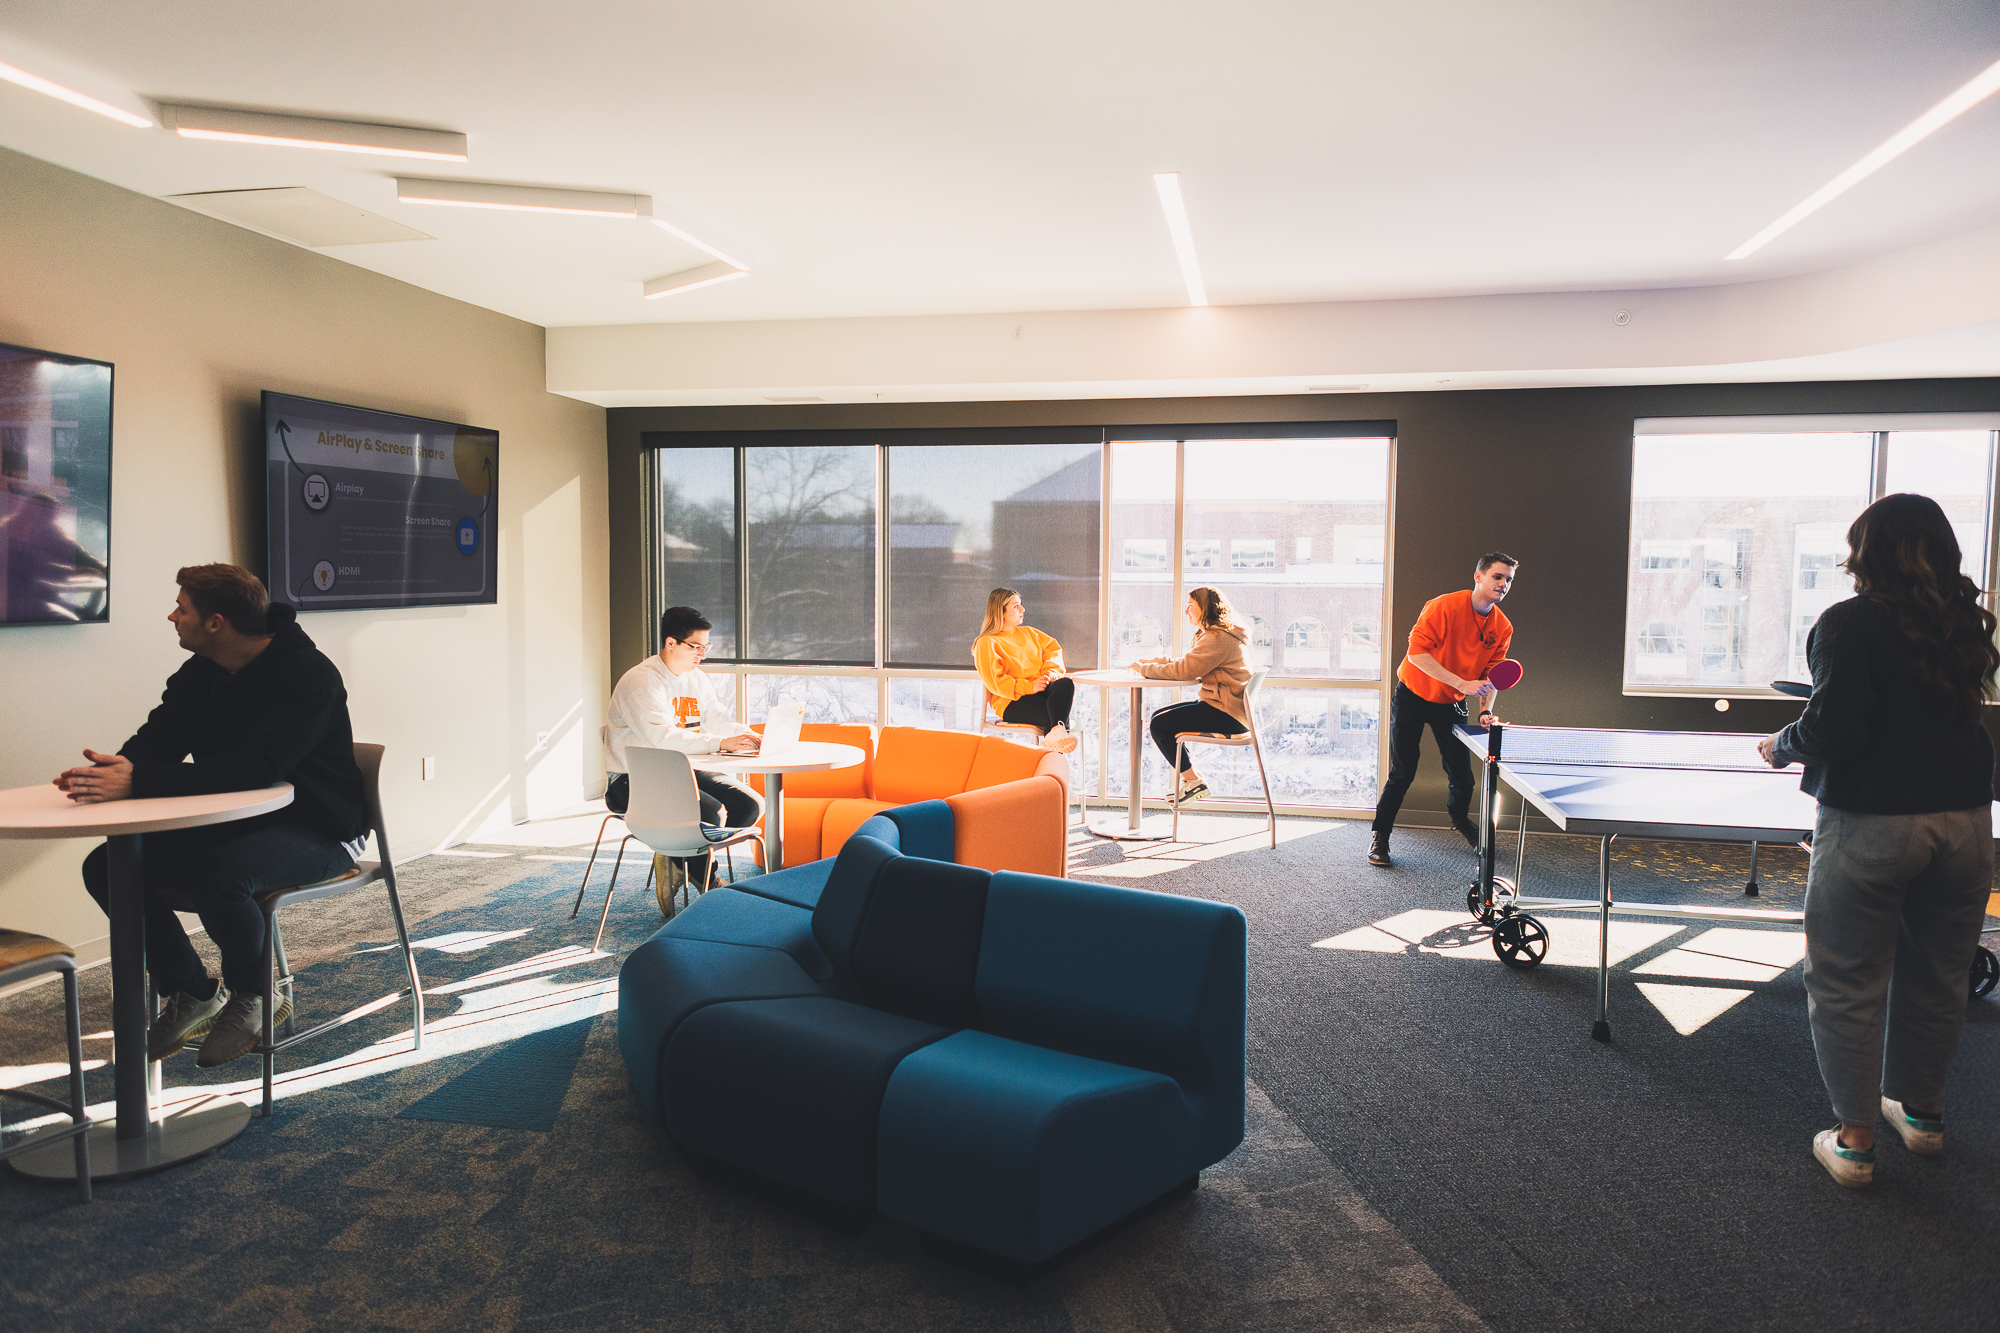 Students use a lounge in New Hall, which is well-lit by a bank of windows. Two students play ping-pong to the right, while two other students sit and talk at a high-top table near the windows. A third student works on a laptop at a small, white, round table around which an orange couch curves. 